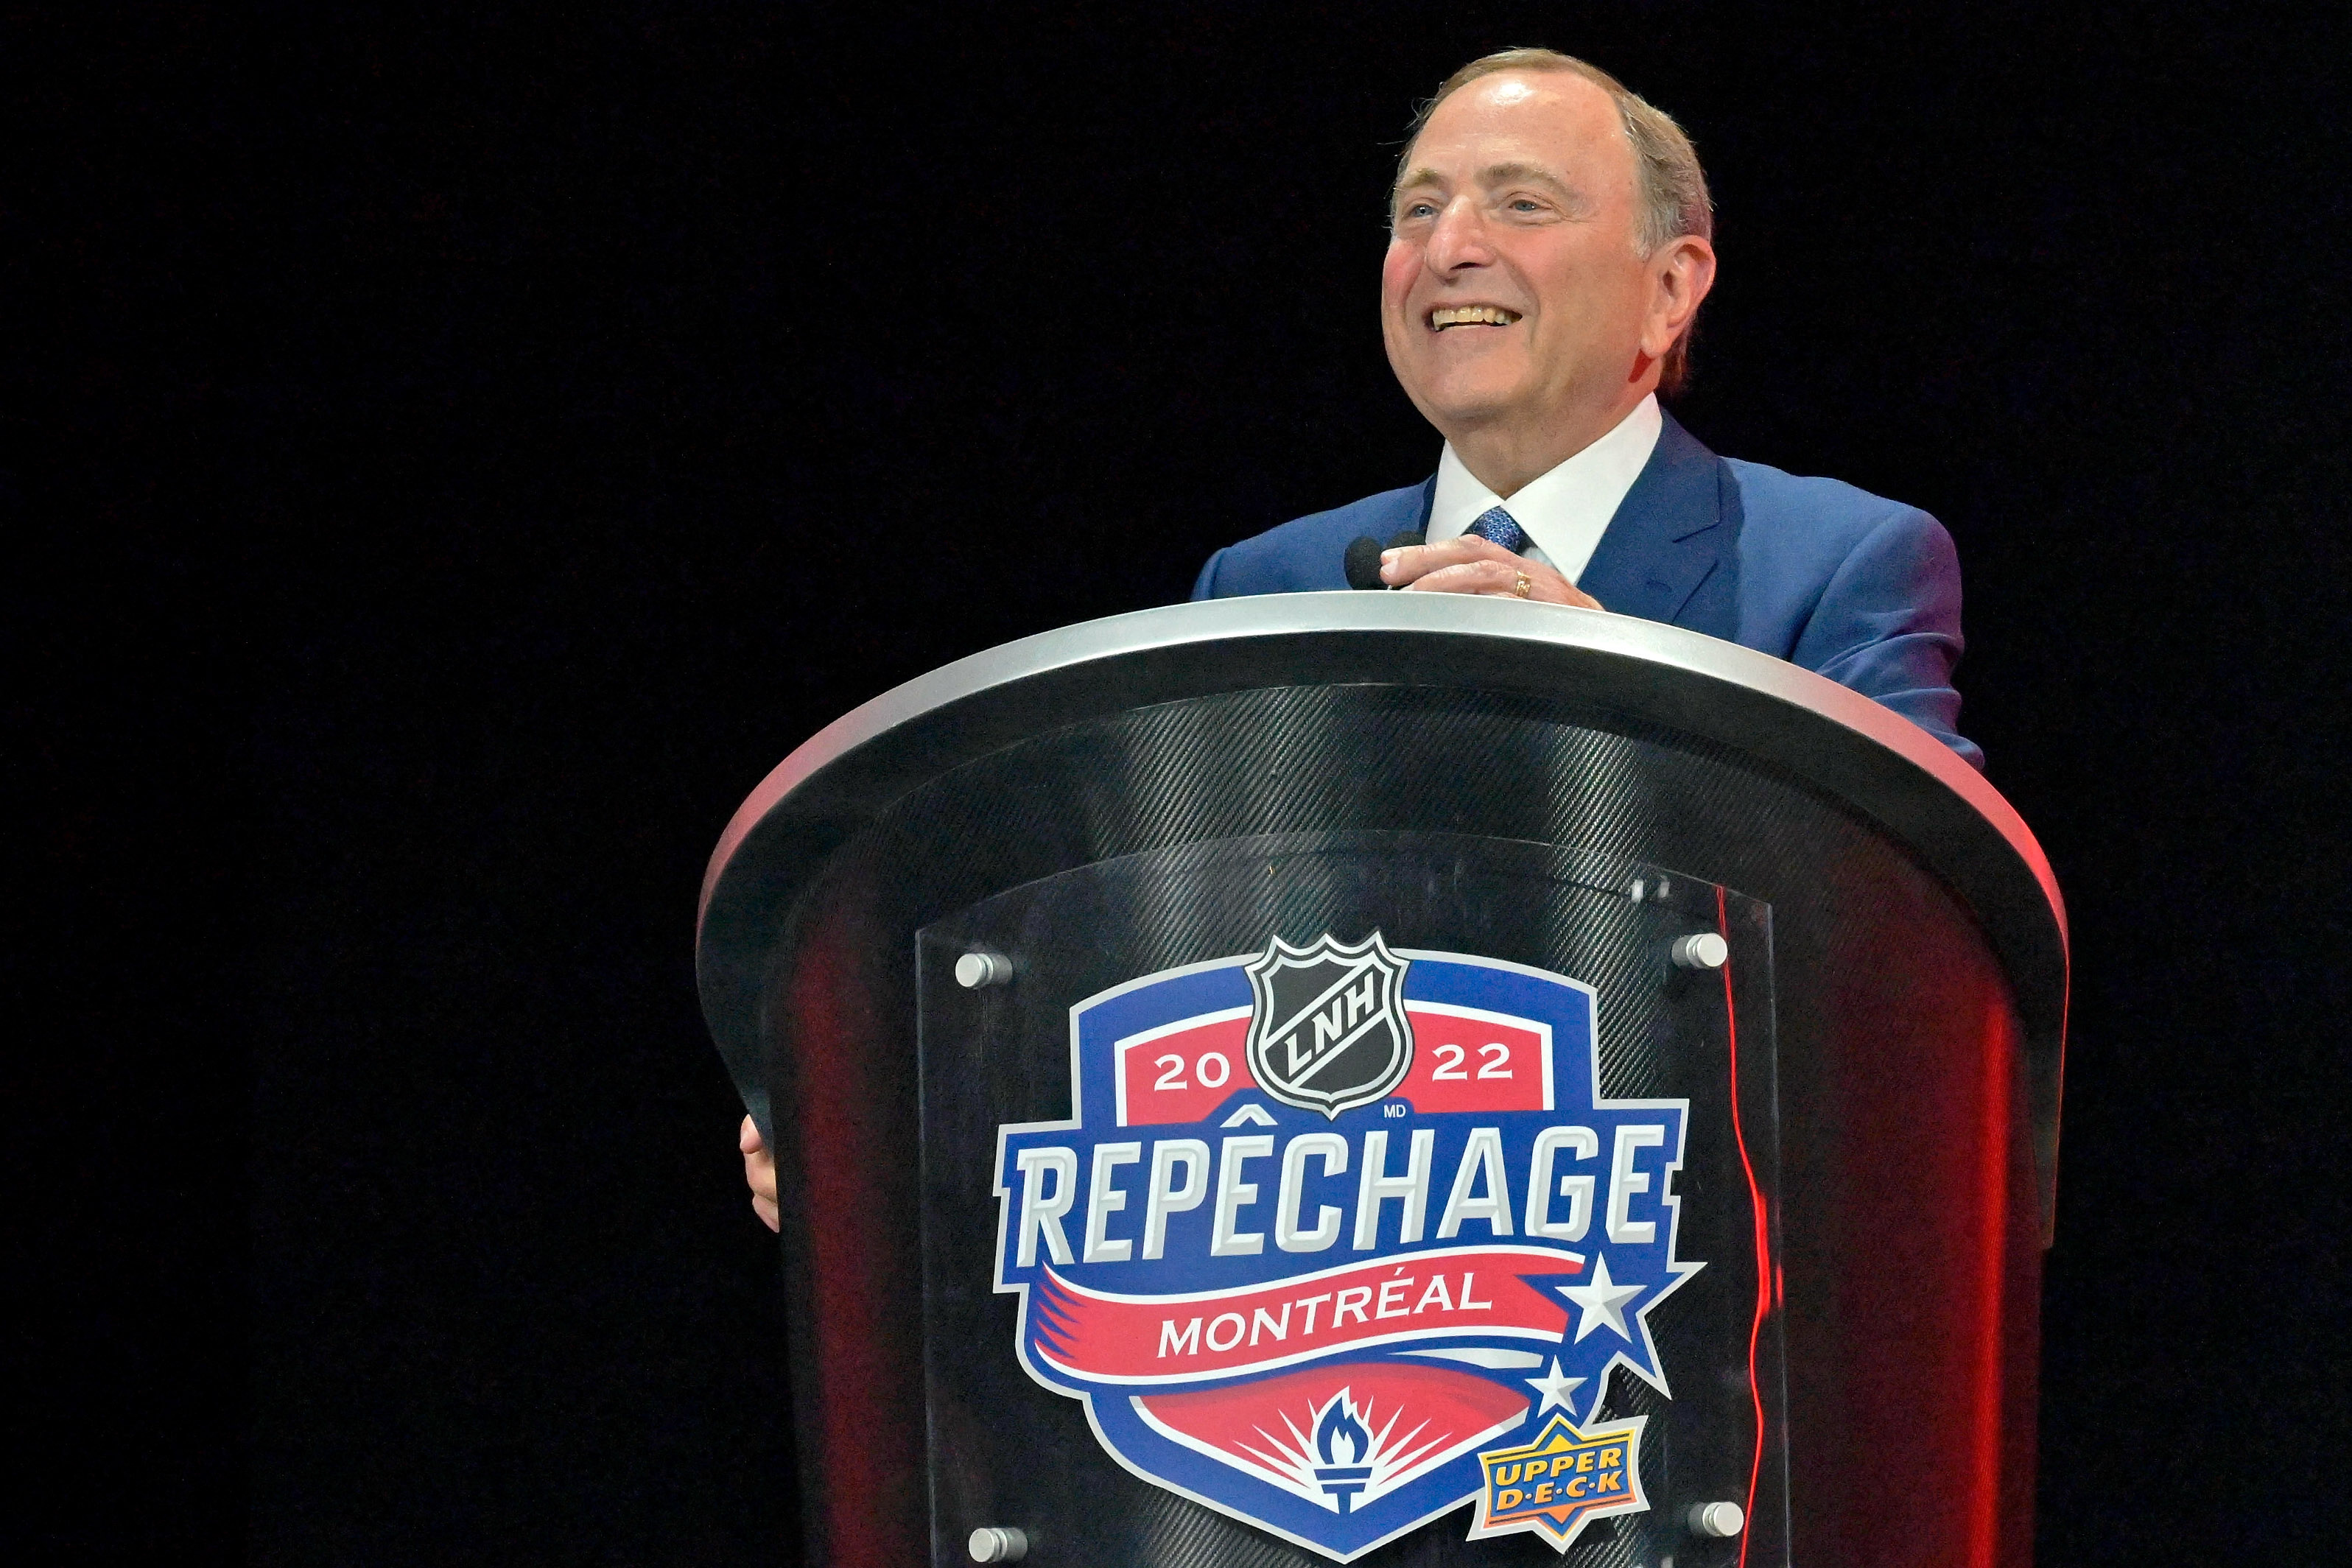 Jul 7, 2022; Montreal, Quebec, CANADA; NHL commissioner Gary Bettman speaks during the first round of the 2022 NHL Draft at Bell Centre. Mandatory Credit: Eric Bolte-USA TODAY Sports